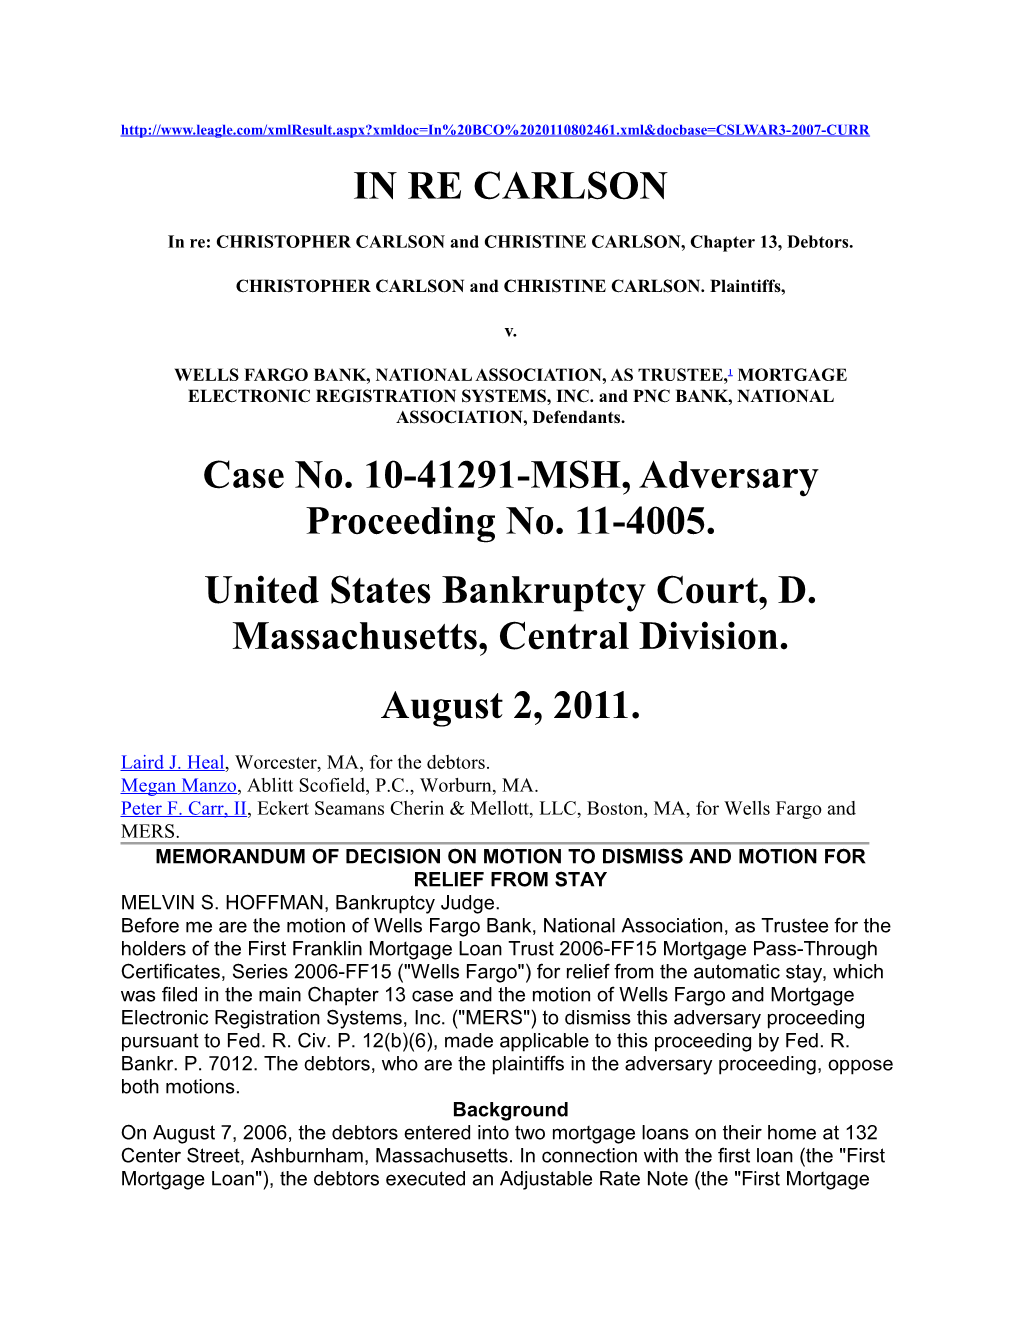 In Re: CHRISTOPHER CARLSON and CHRISTINE CARLSON, Chapter 13, Debtors